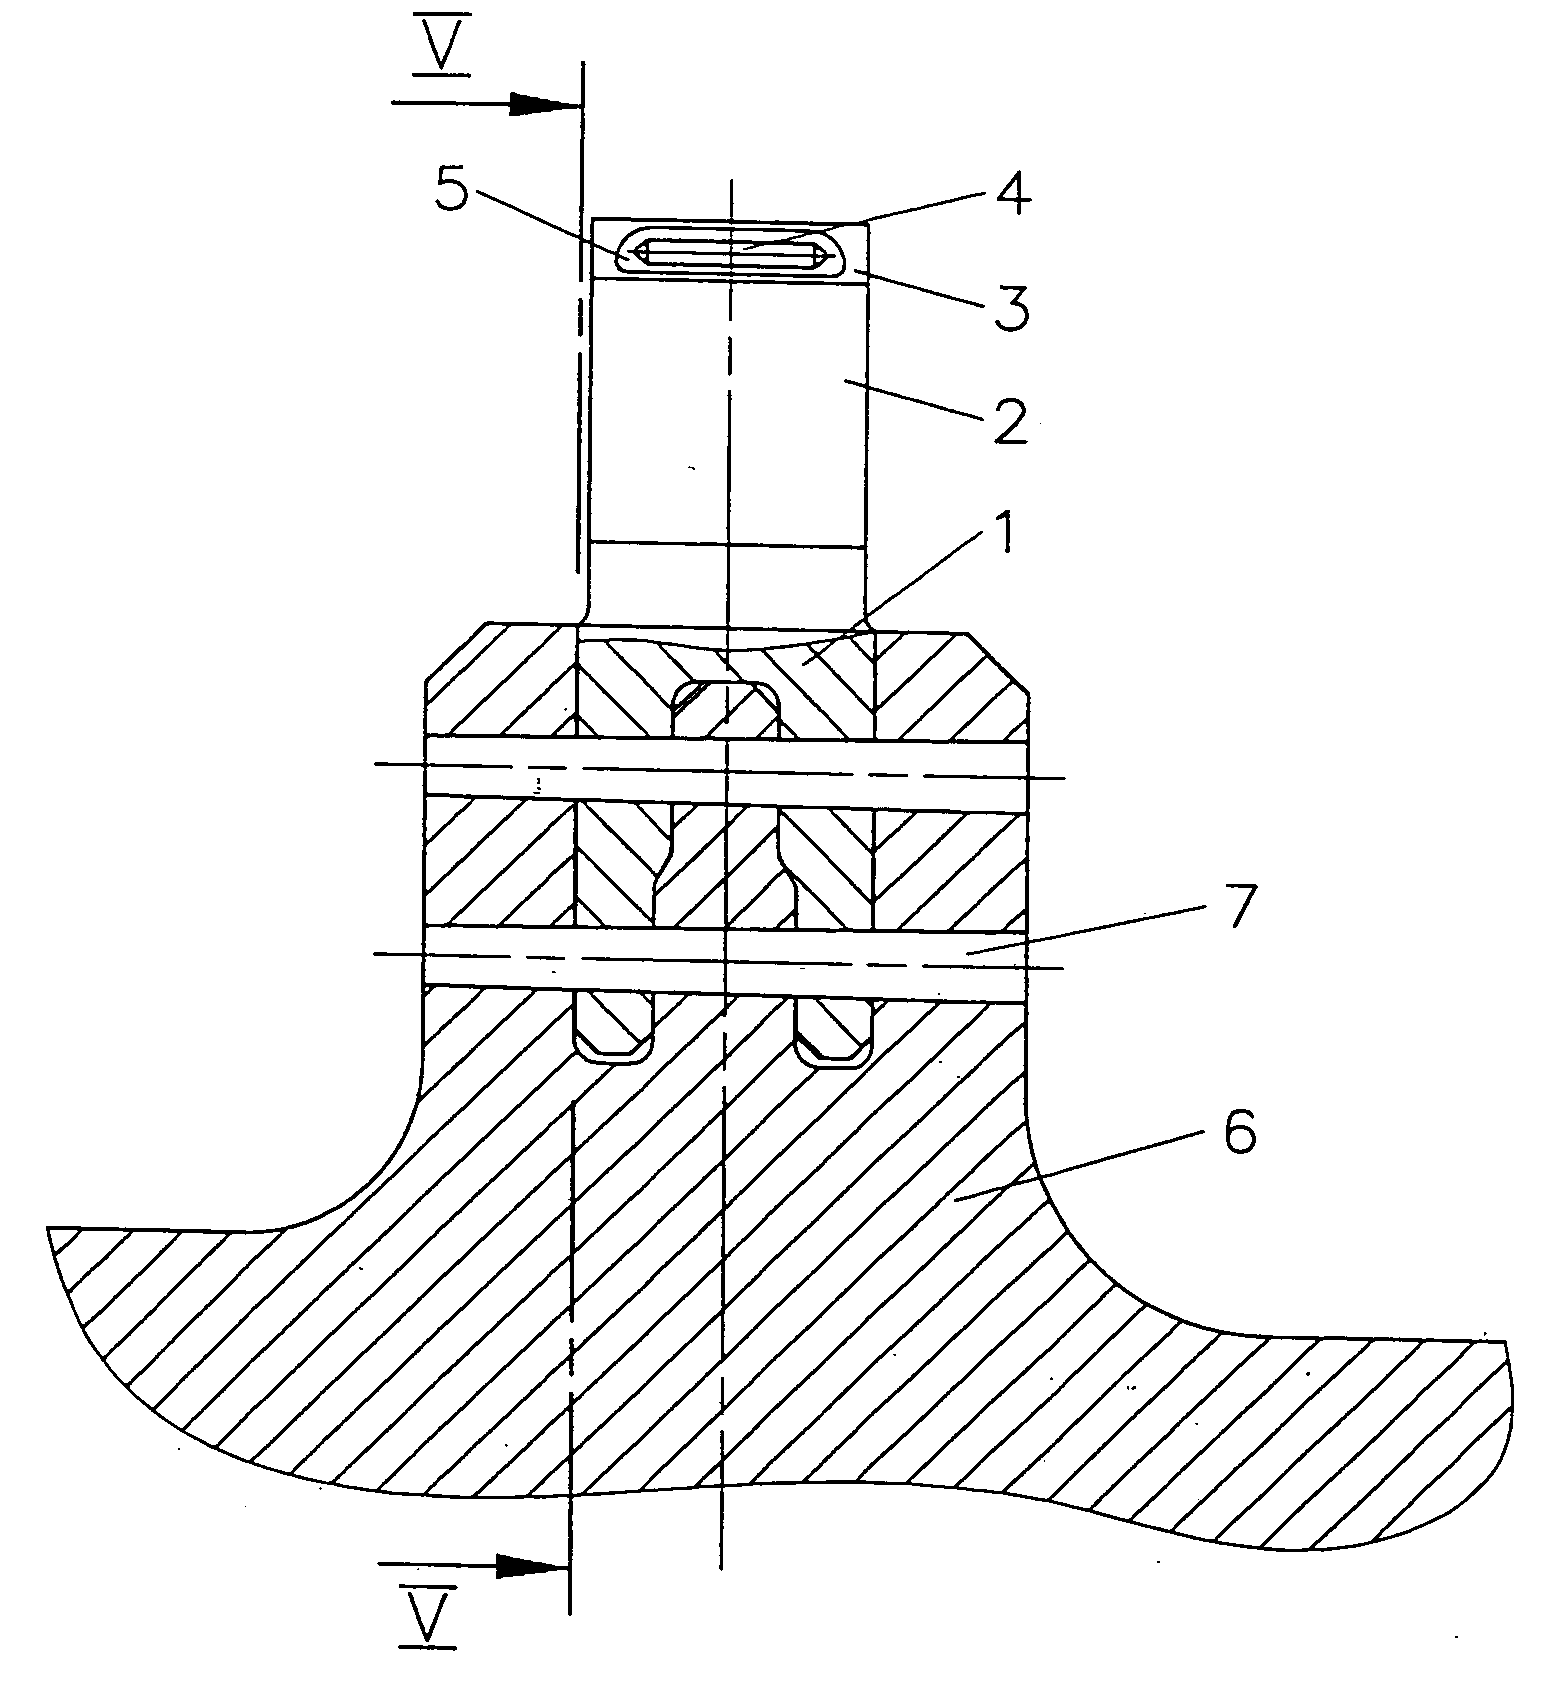 Rotor of a steam or gas turbine